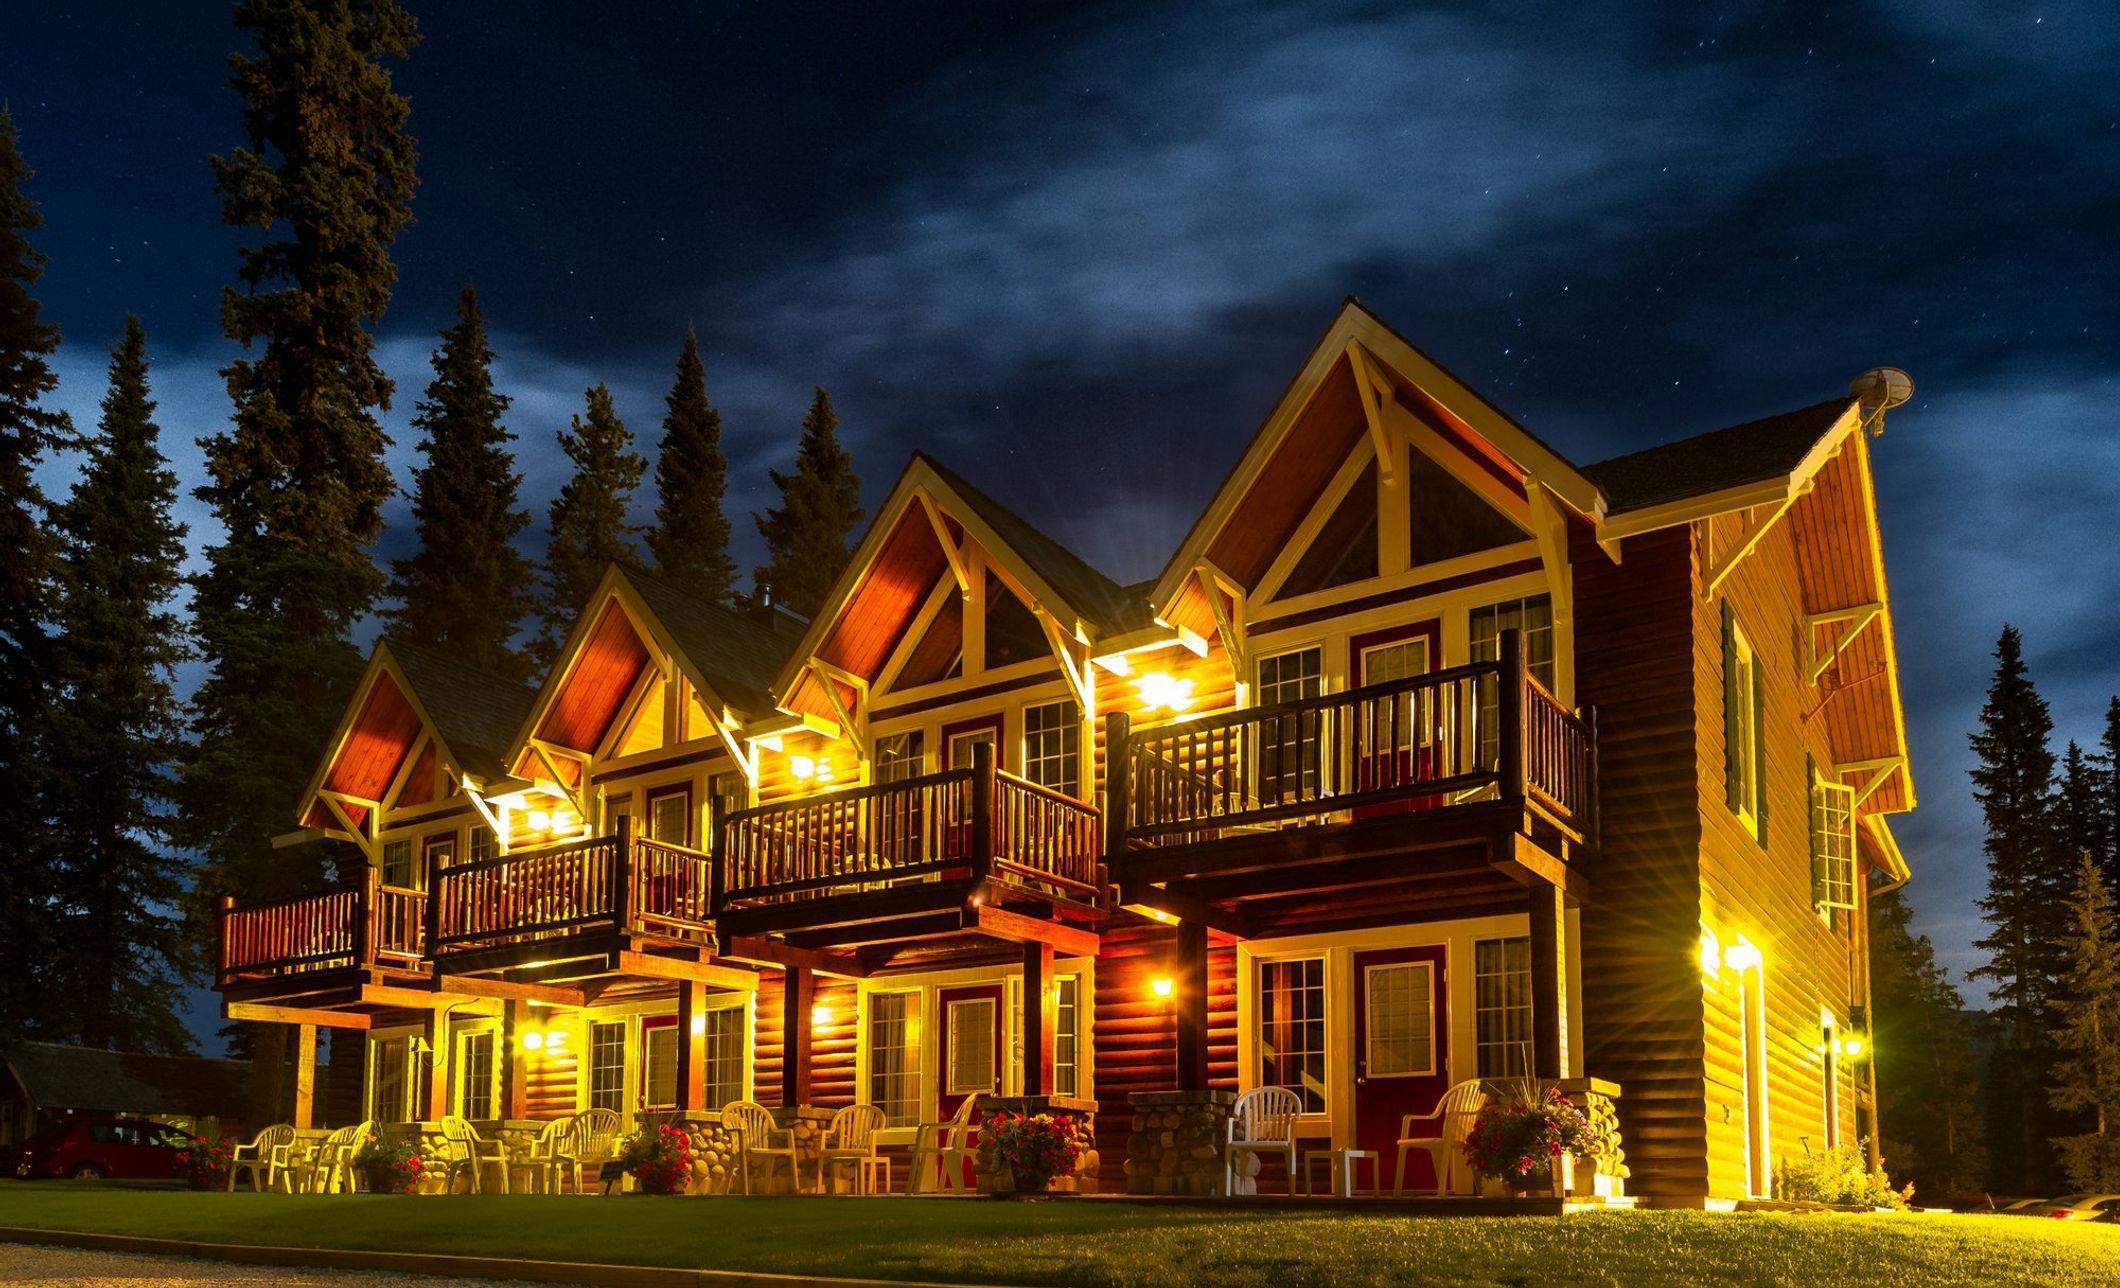 Lodge with private balconies and porches lit up at night with the stars above